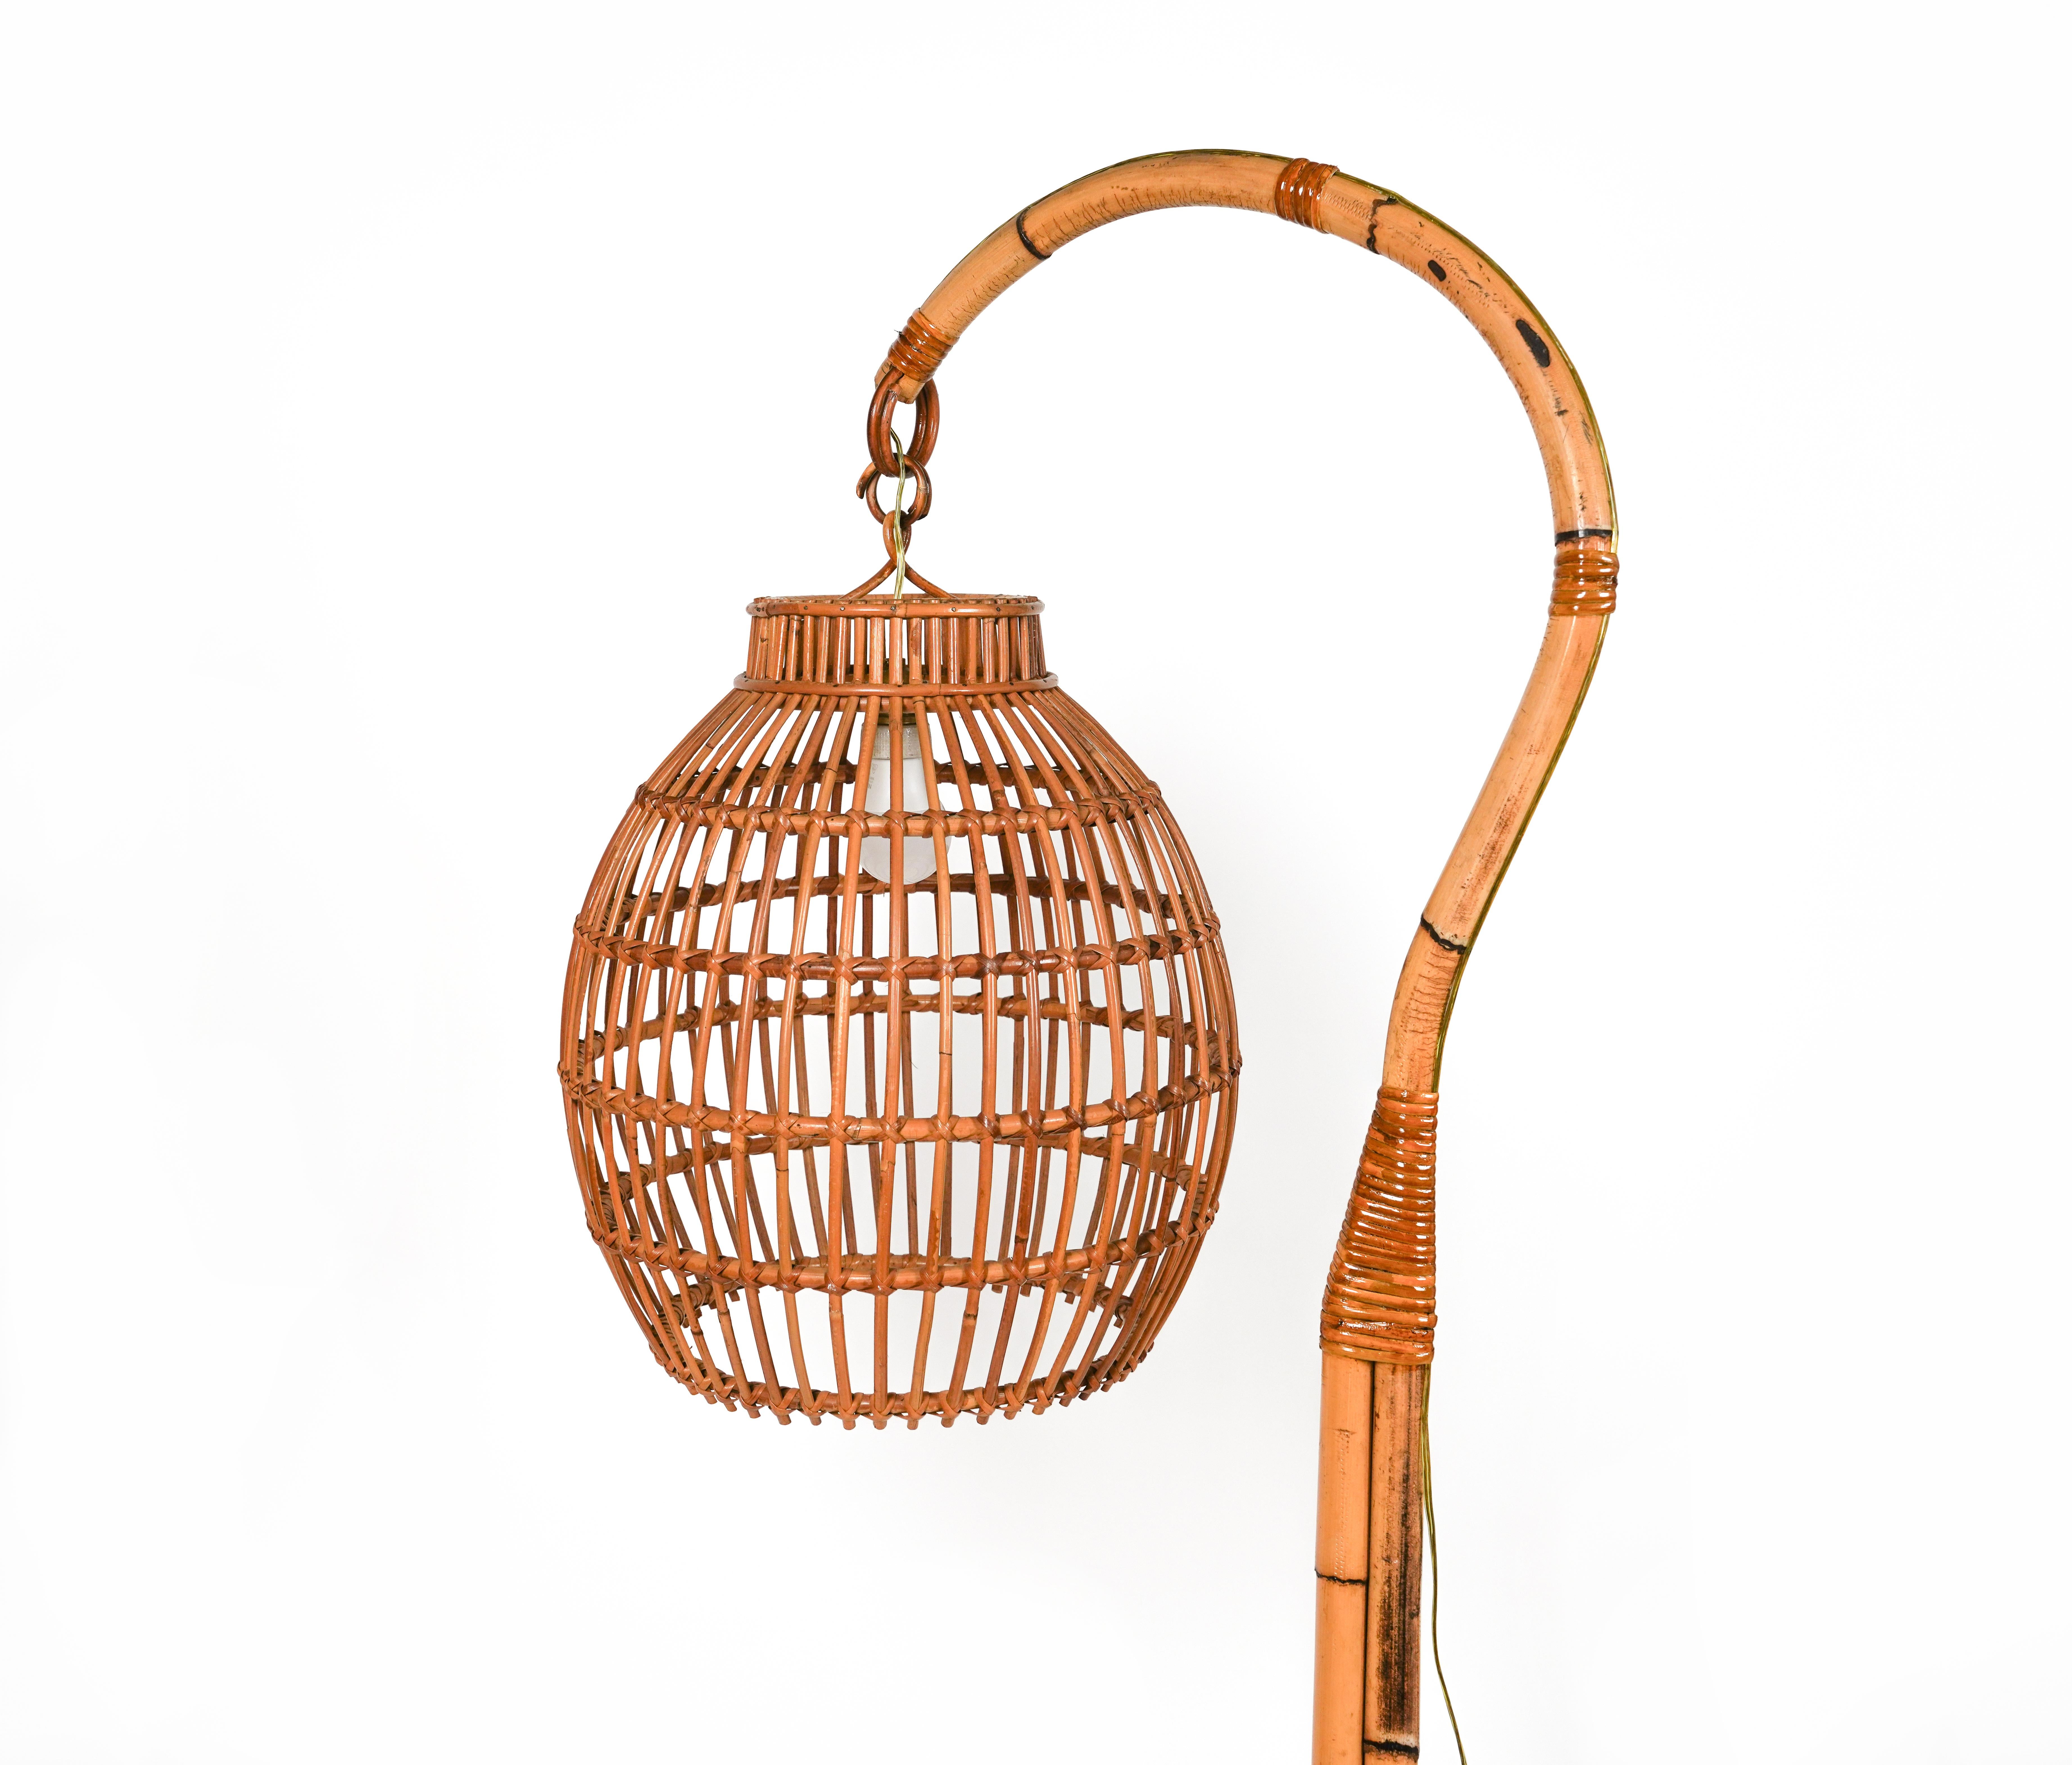 Midcentury Rattan and Bamboo Floor Lamp Louis Sognot Style, Italy 1960s For Sale 8